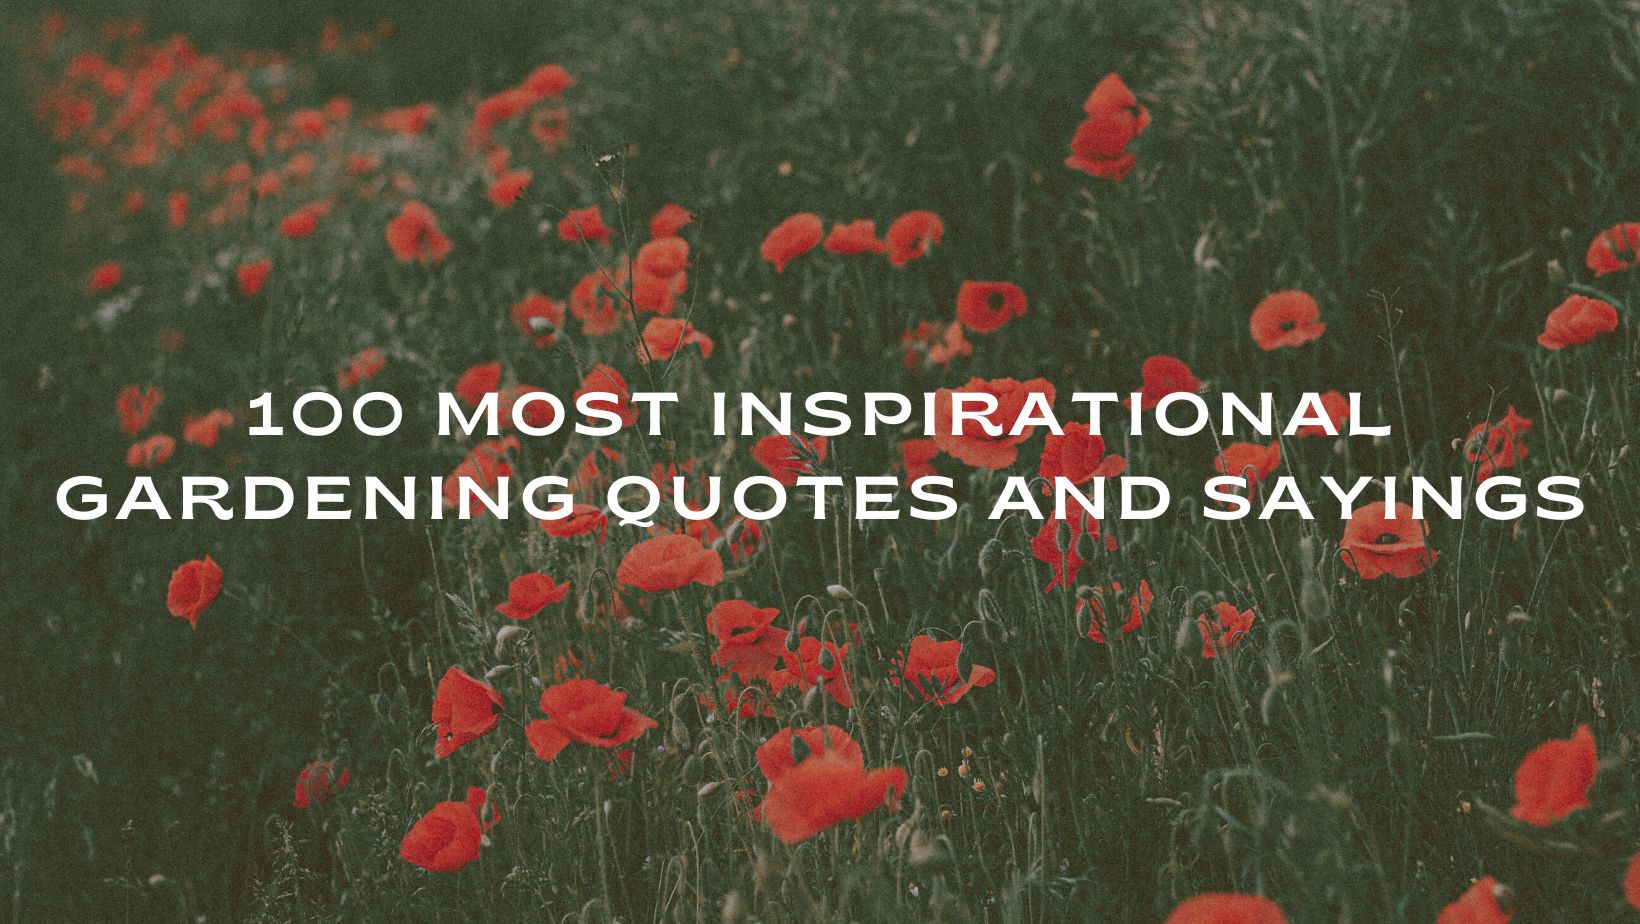 Gardening quotes blog feature image